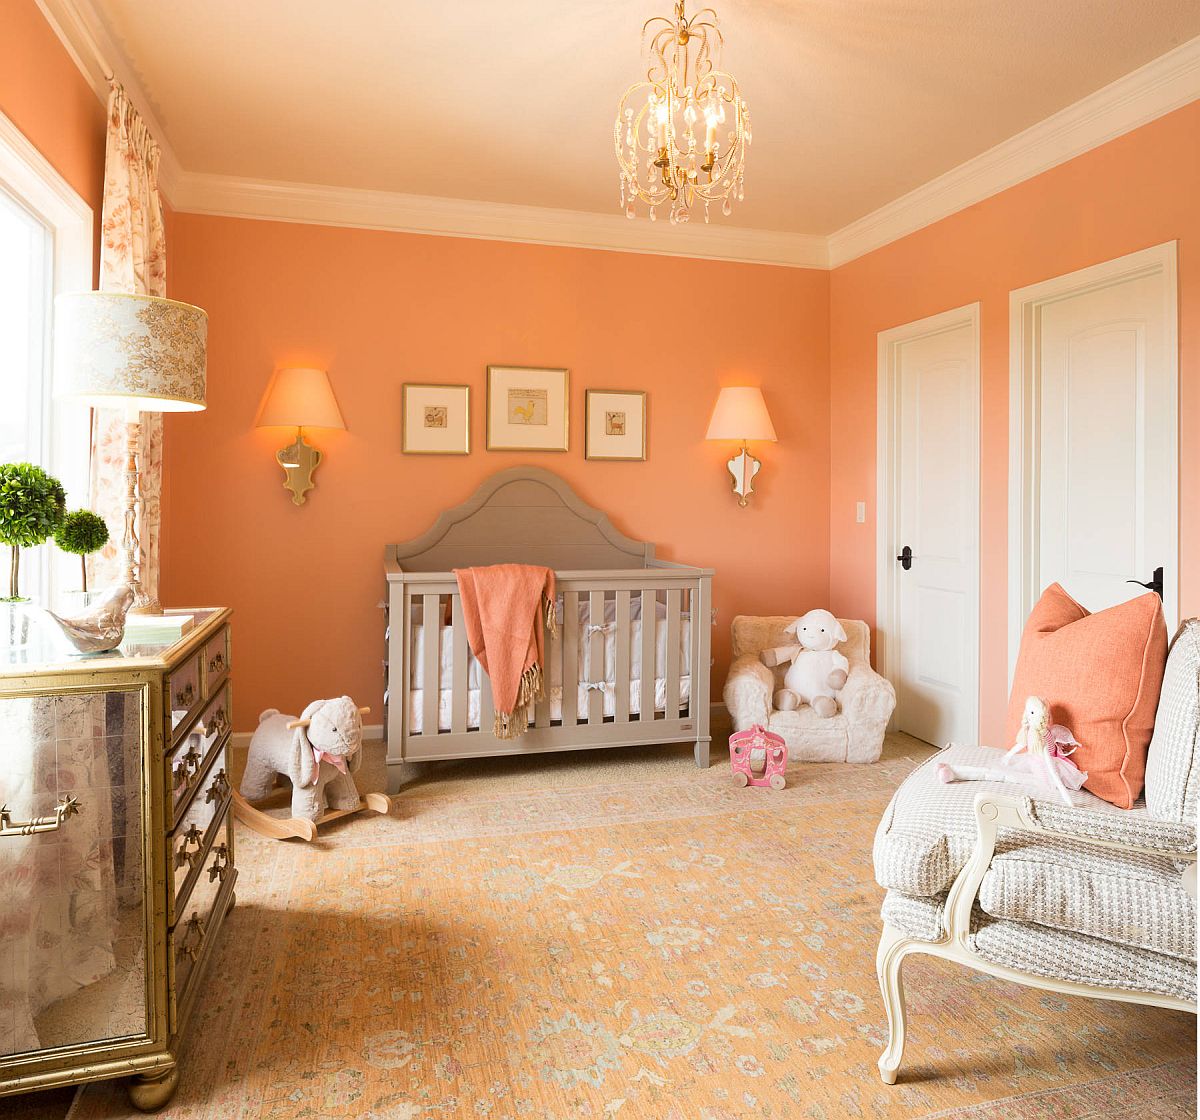 Fill the Nursery with Fall Brilliance: Trendy Colors that make a
Difference